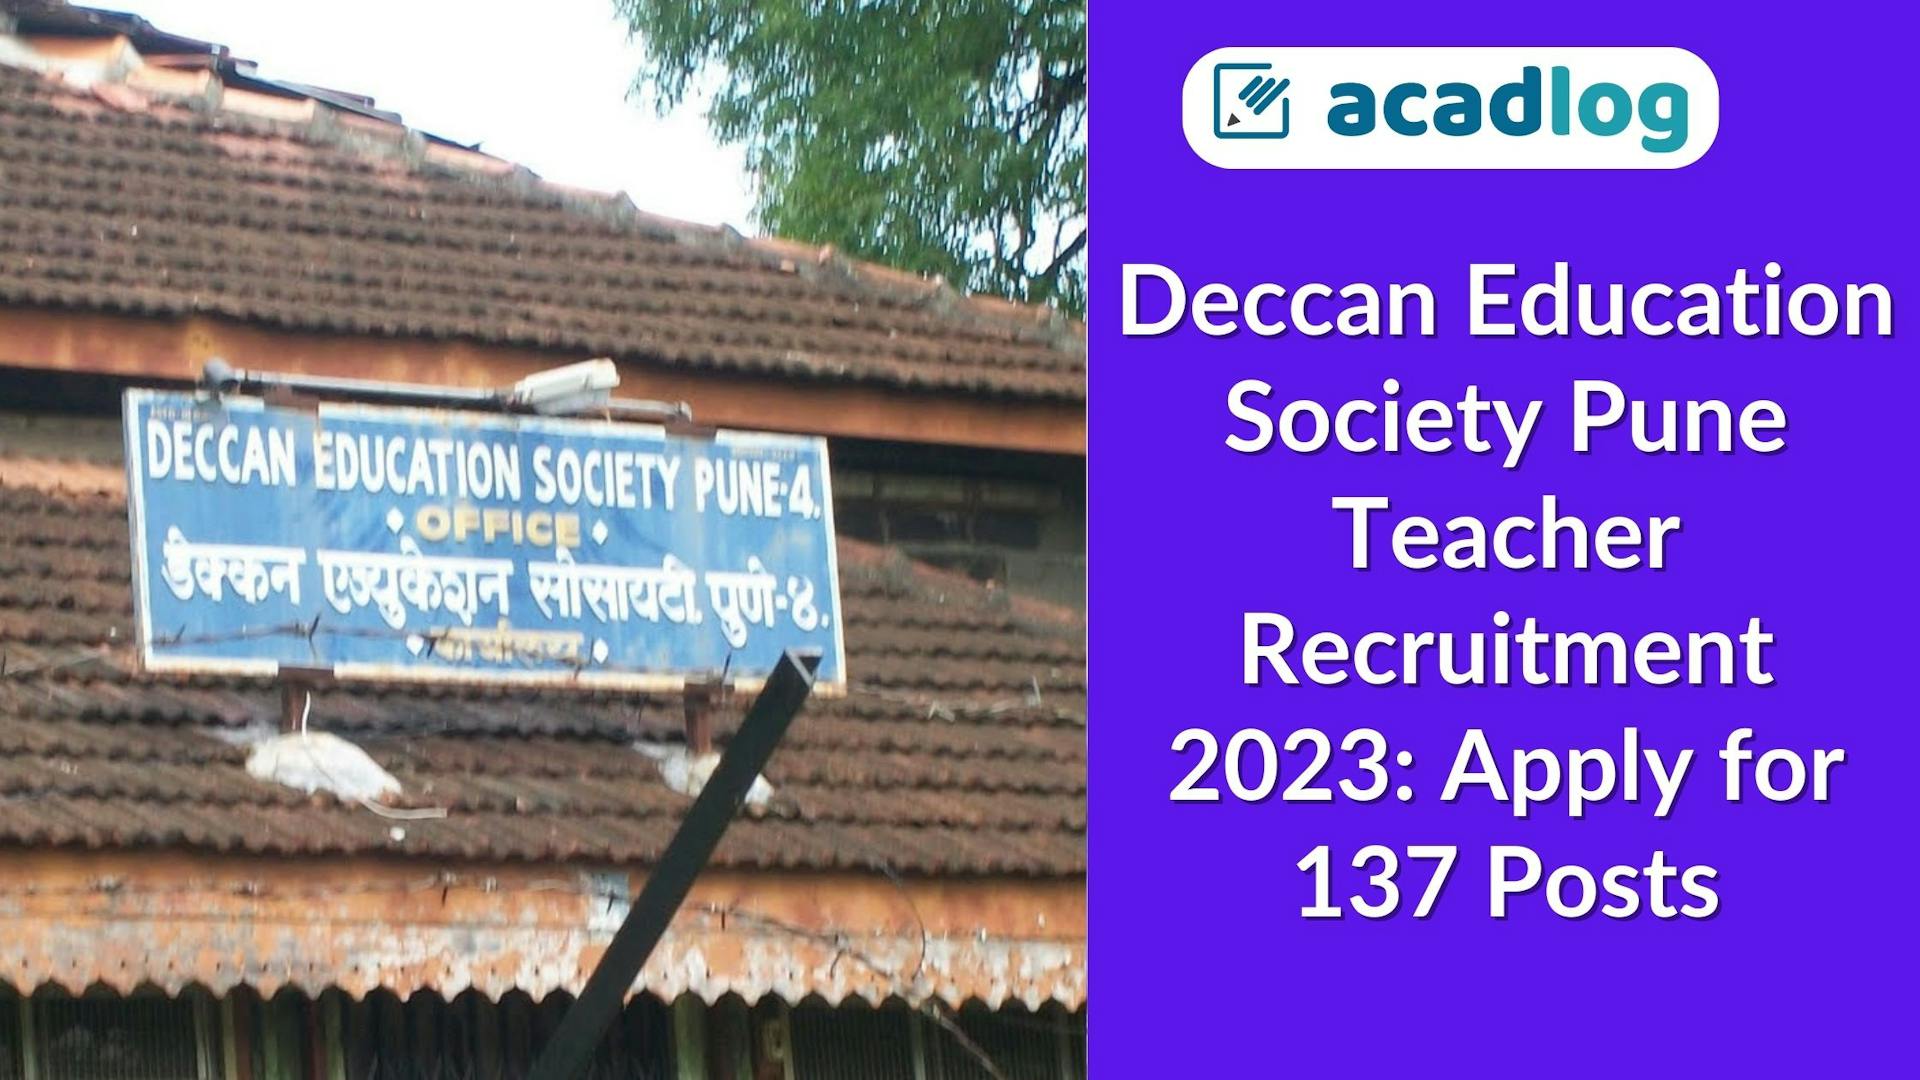 Deccan Education Society Pune Teacher Recruitment 2023: Apply for 137 Posts